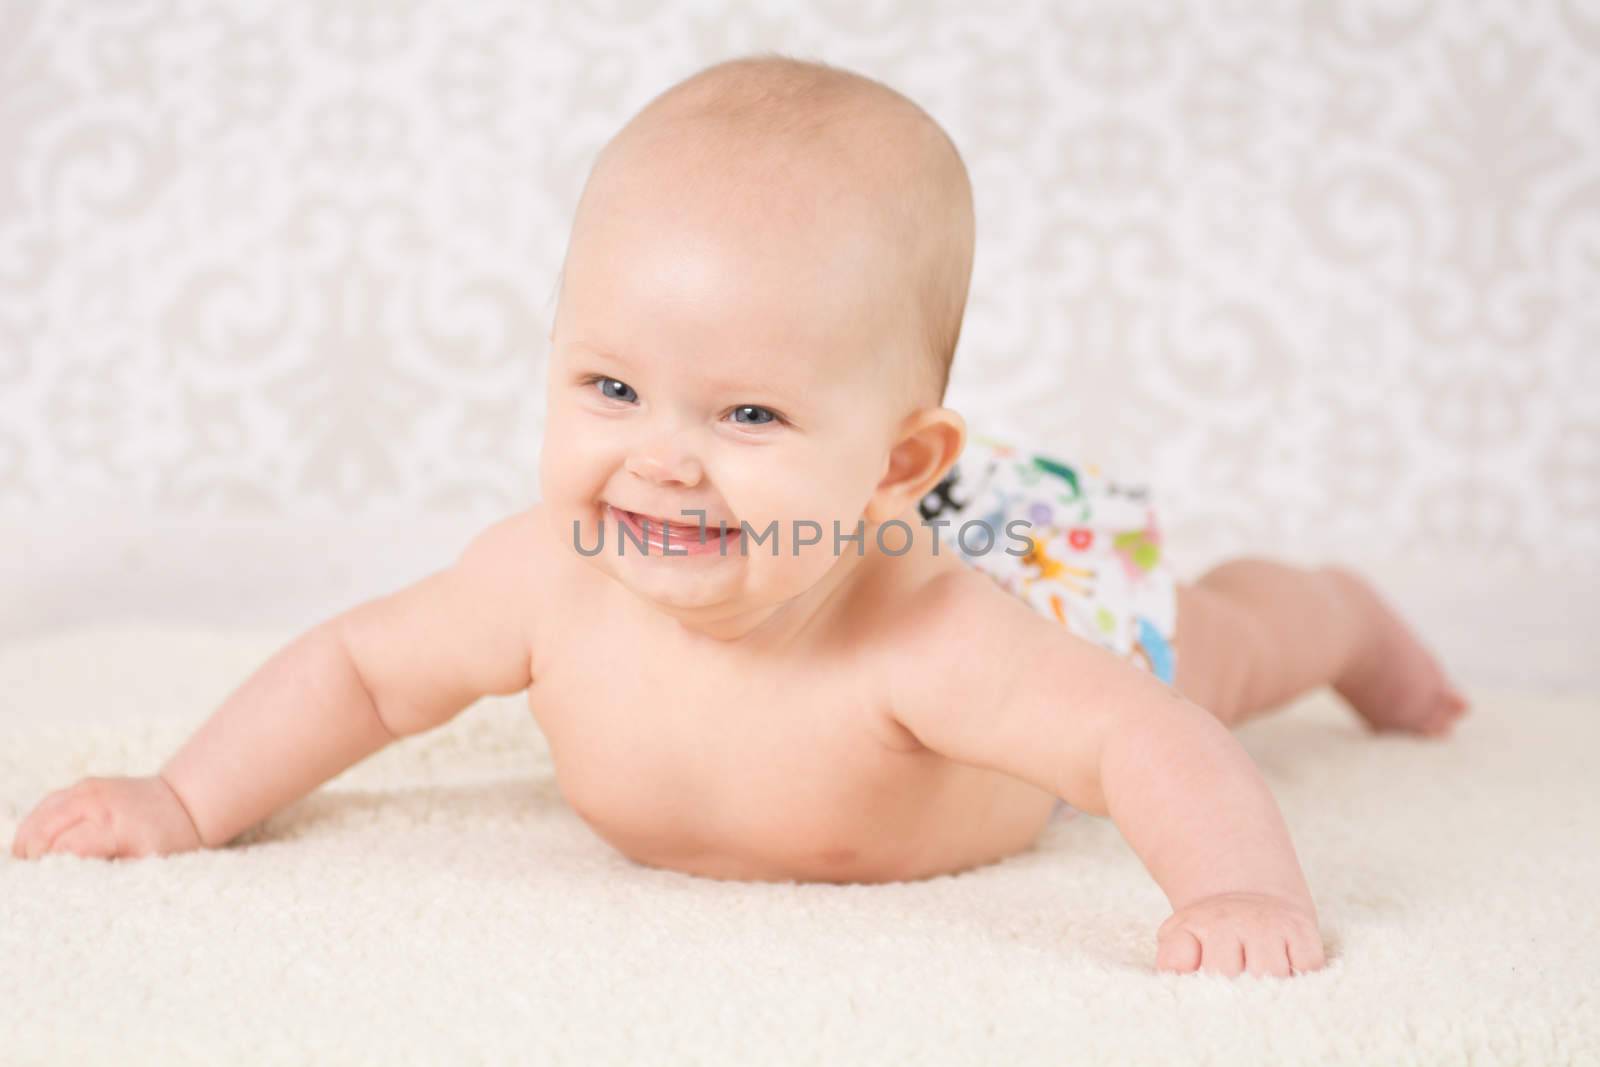 Baby in a reusable nappy, lying on a belly on a light background, arms wide